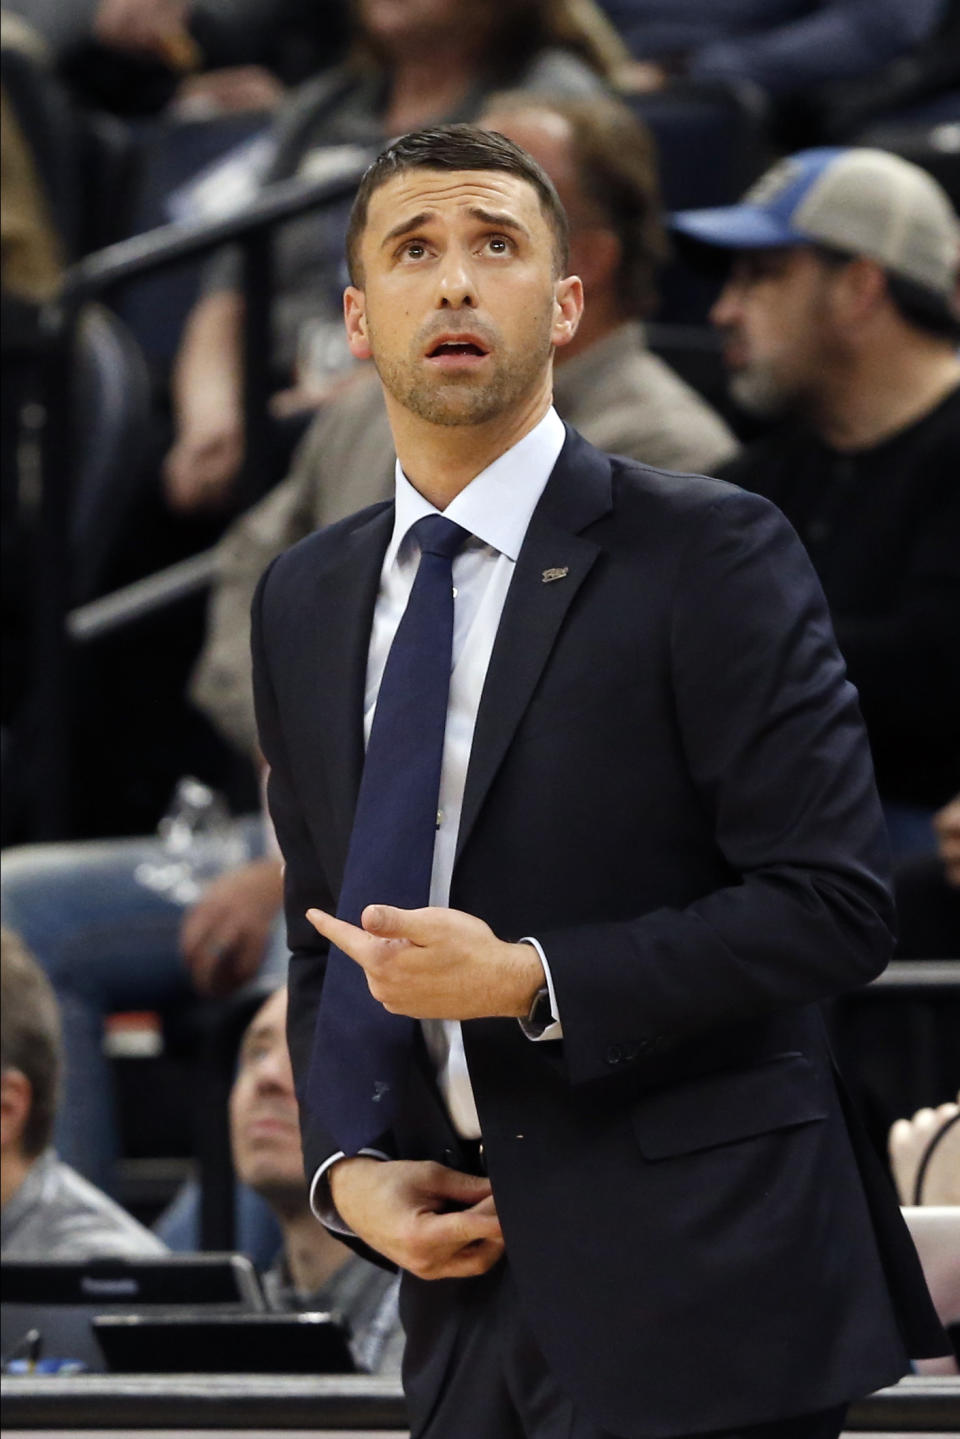 Minnesota Timberwolves head coach Ryan Saunders watches the scoreboard in the first half of an NBA basketball game against the Indiana Pacers, Wednesday, Jan. 15, 2020, in Minneapolis. (AP Photo/Jim Mone)